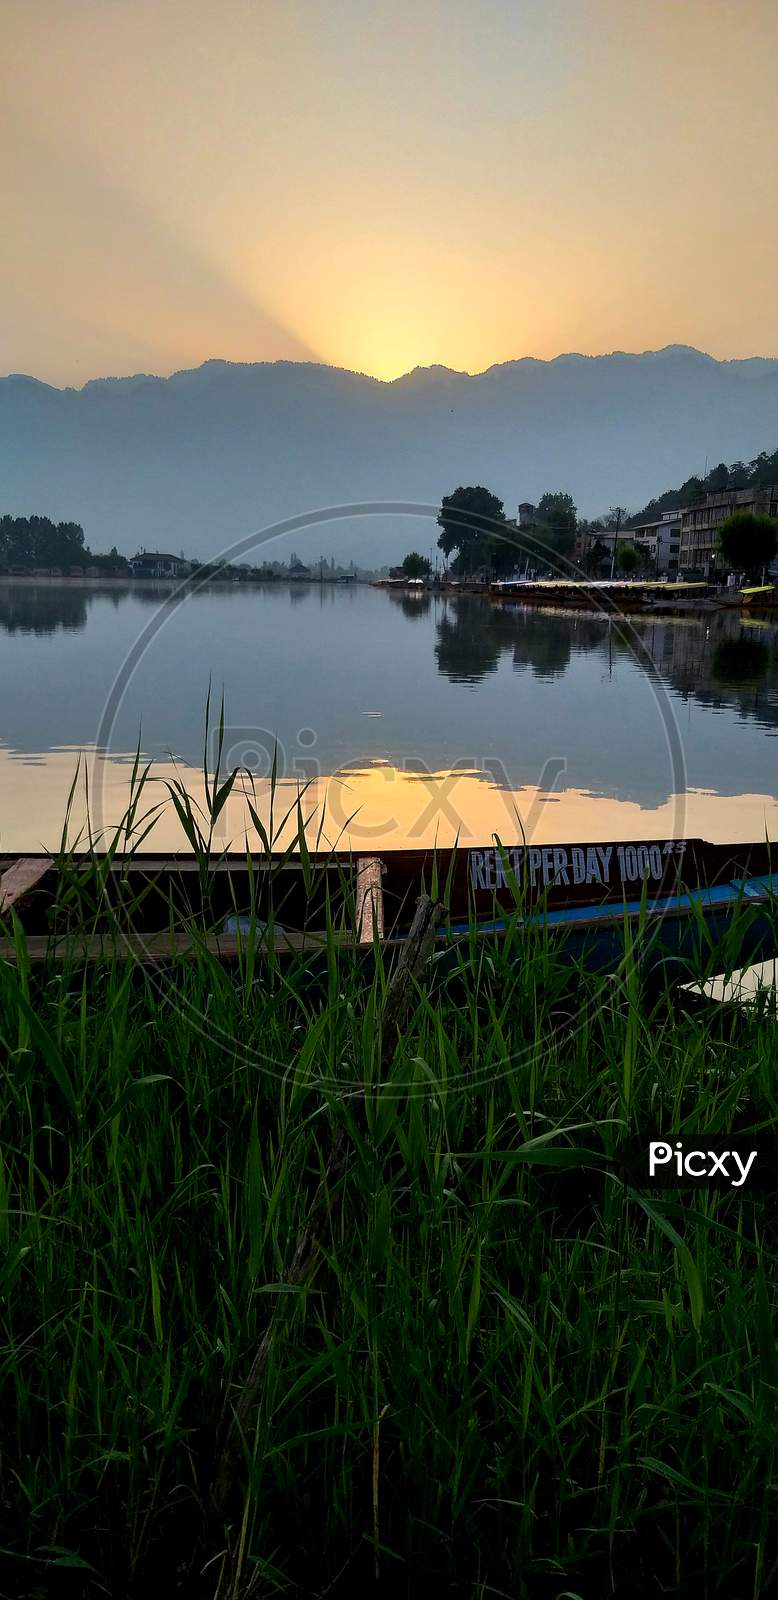 Sunrise and sunset from boat on dal lake